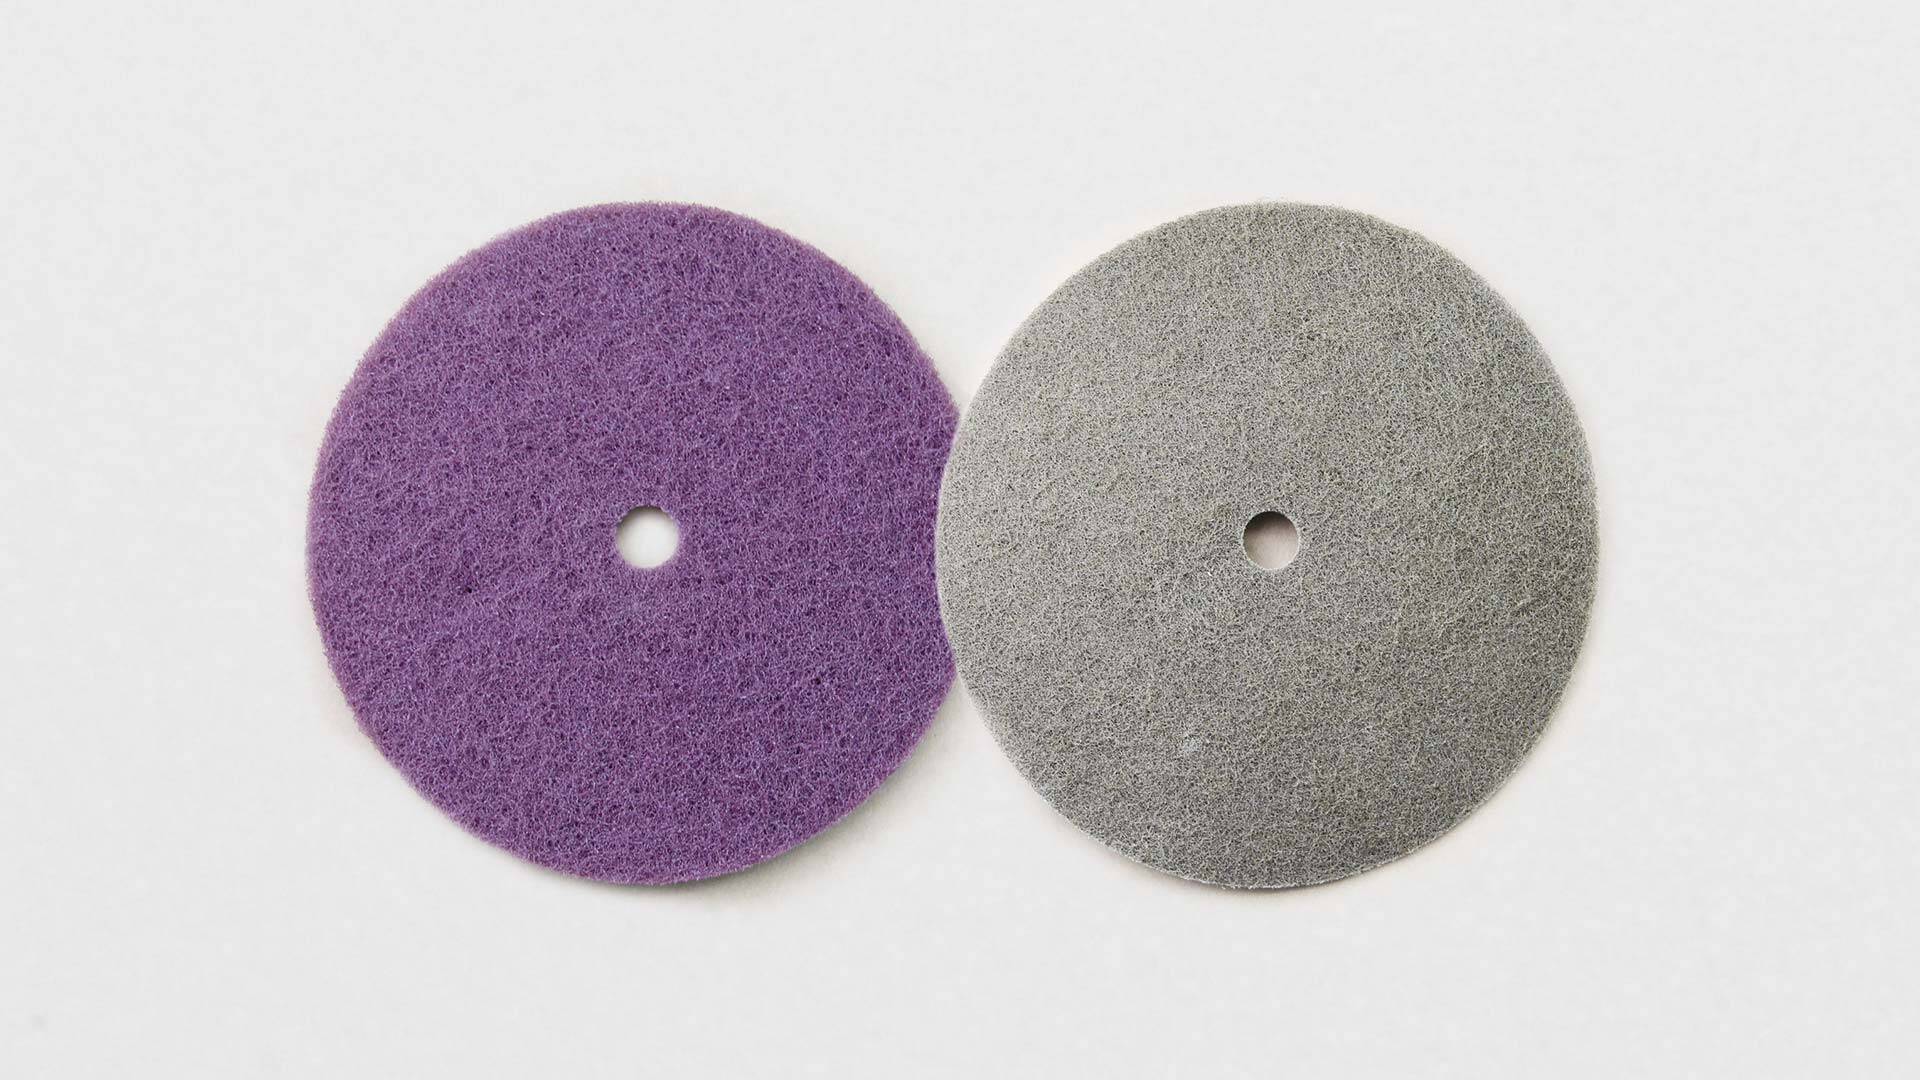 Non Woven Abrasive Discs brush for cleaning, deburring, polishing, and finishing metal